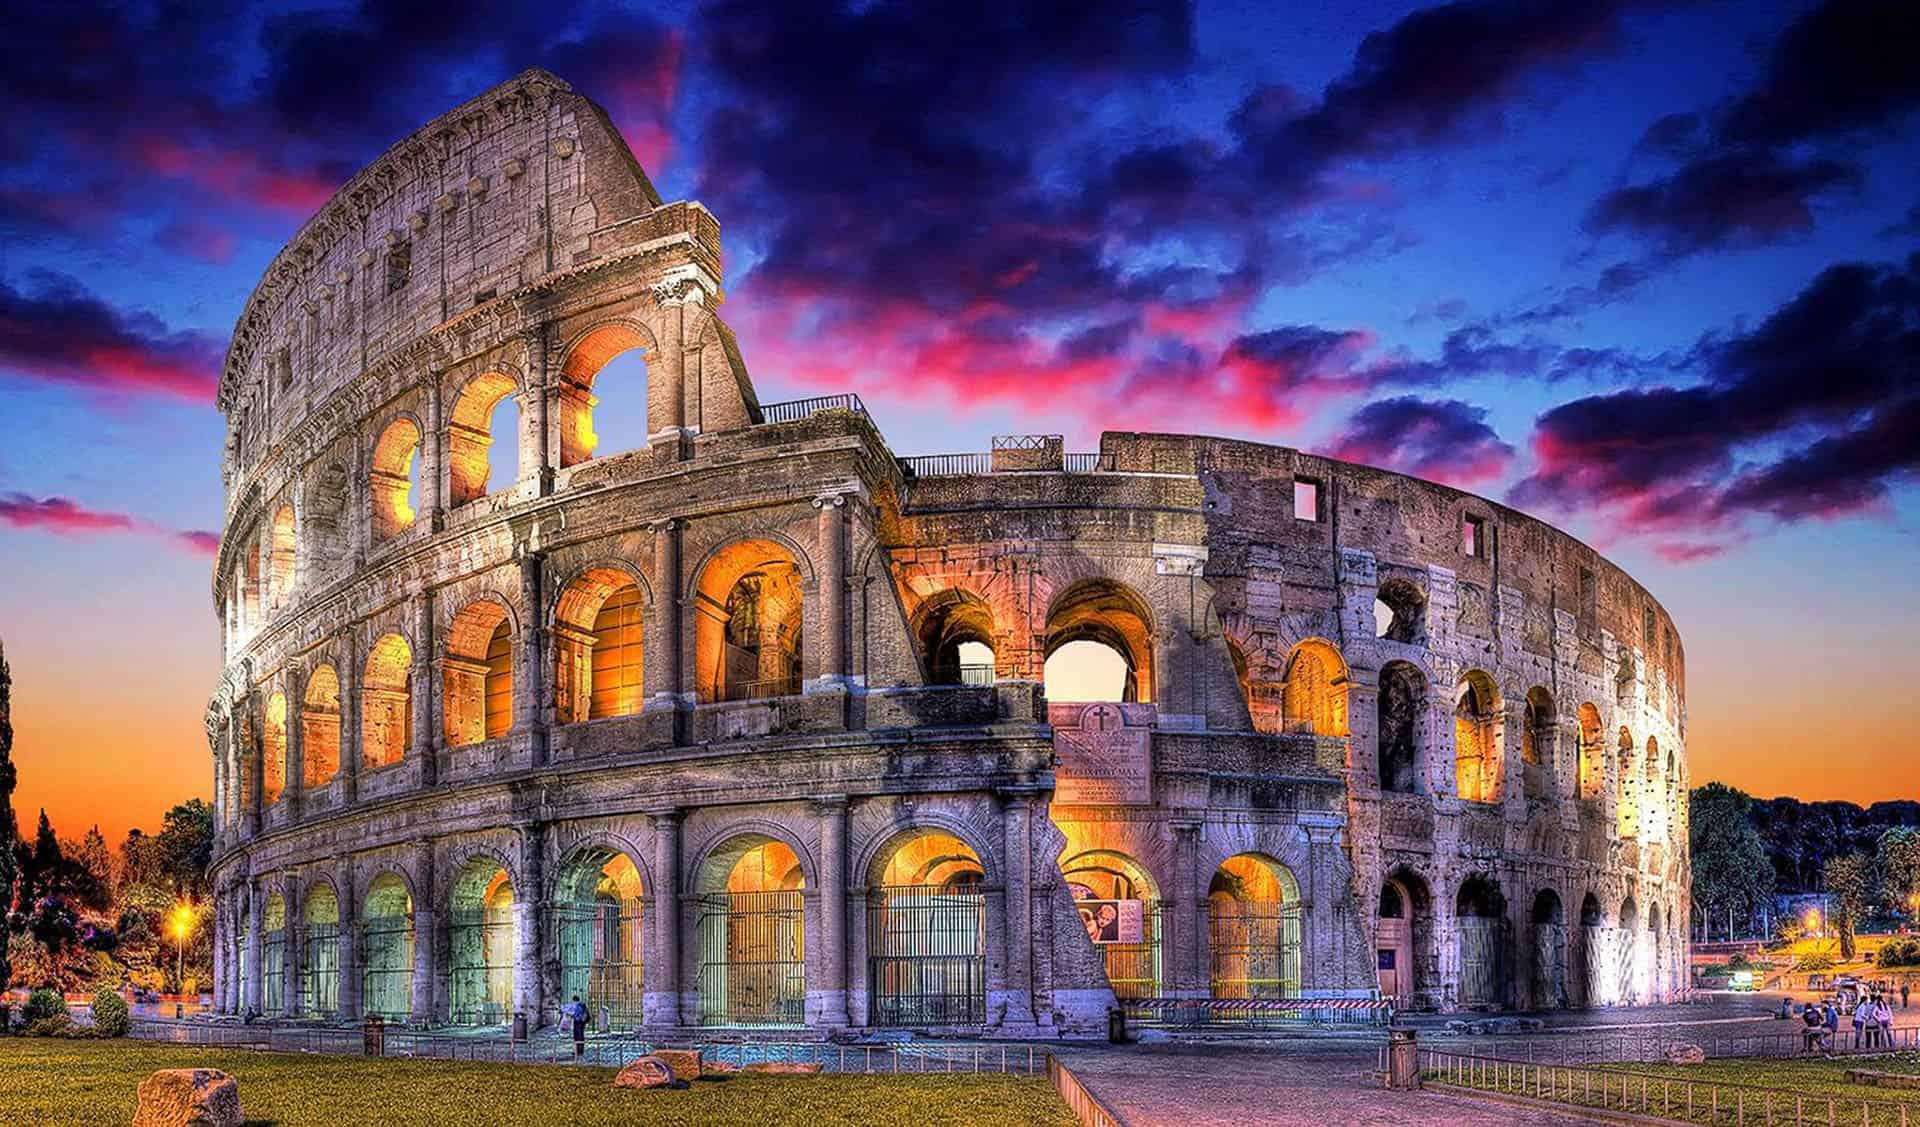 The colosseum in Europe